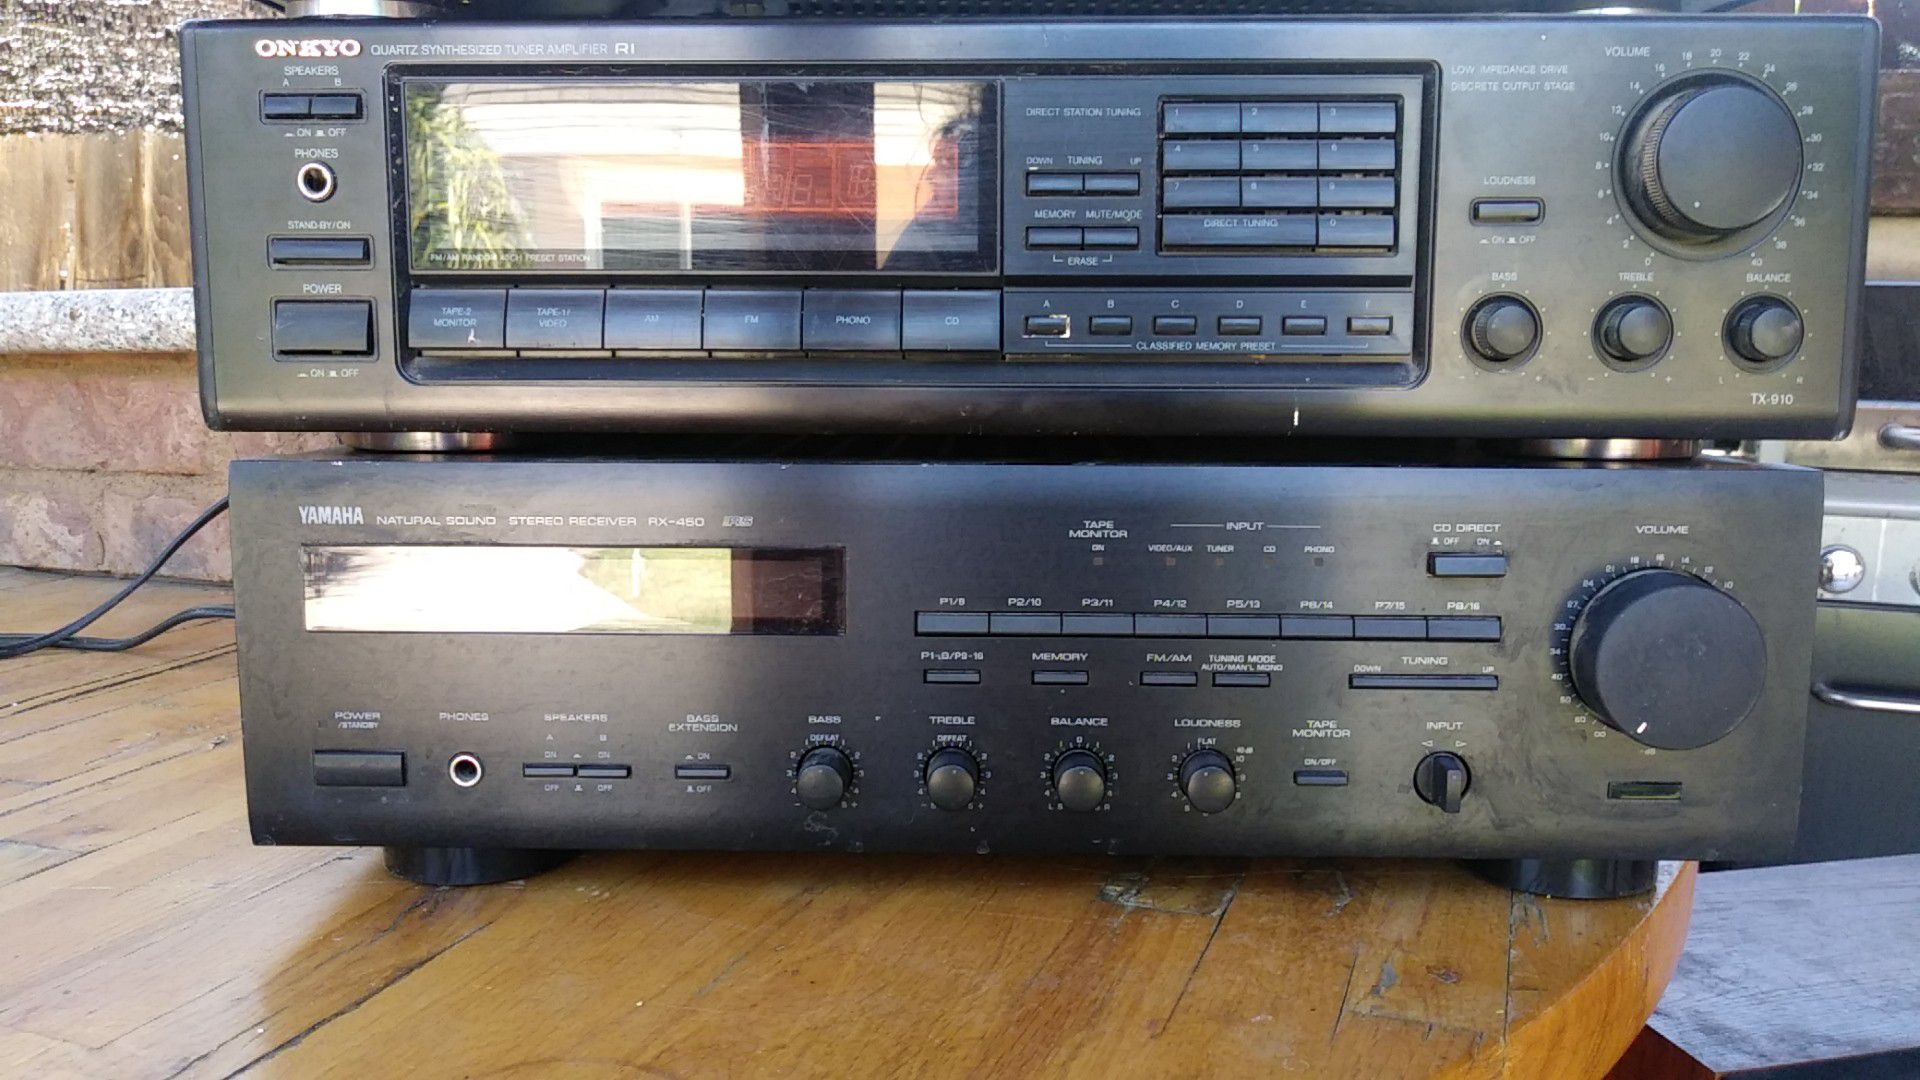 Tuner amplifier and stereo receiver